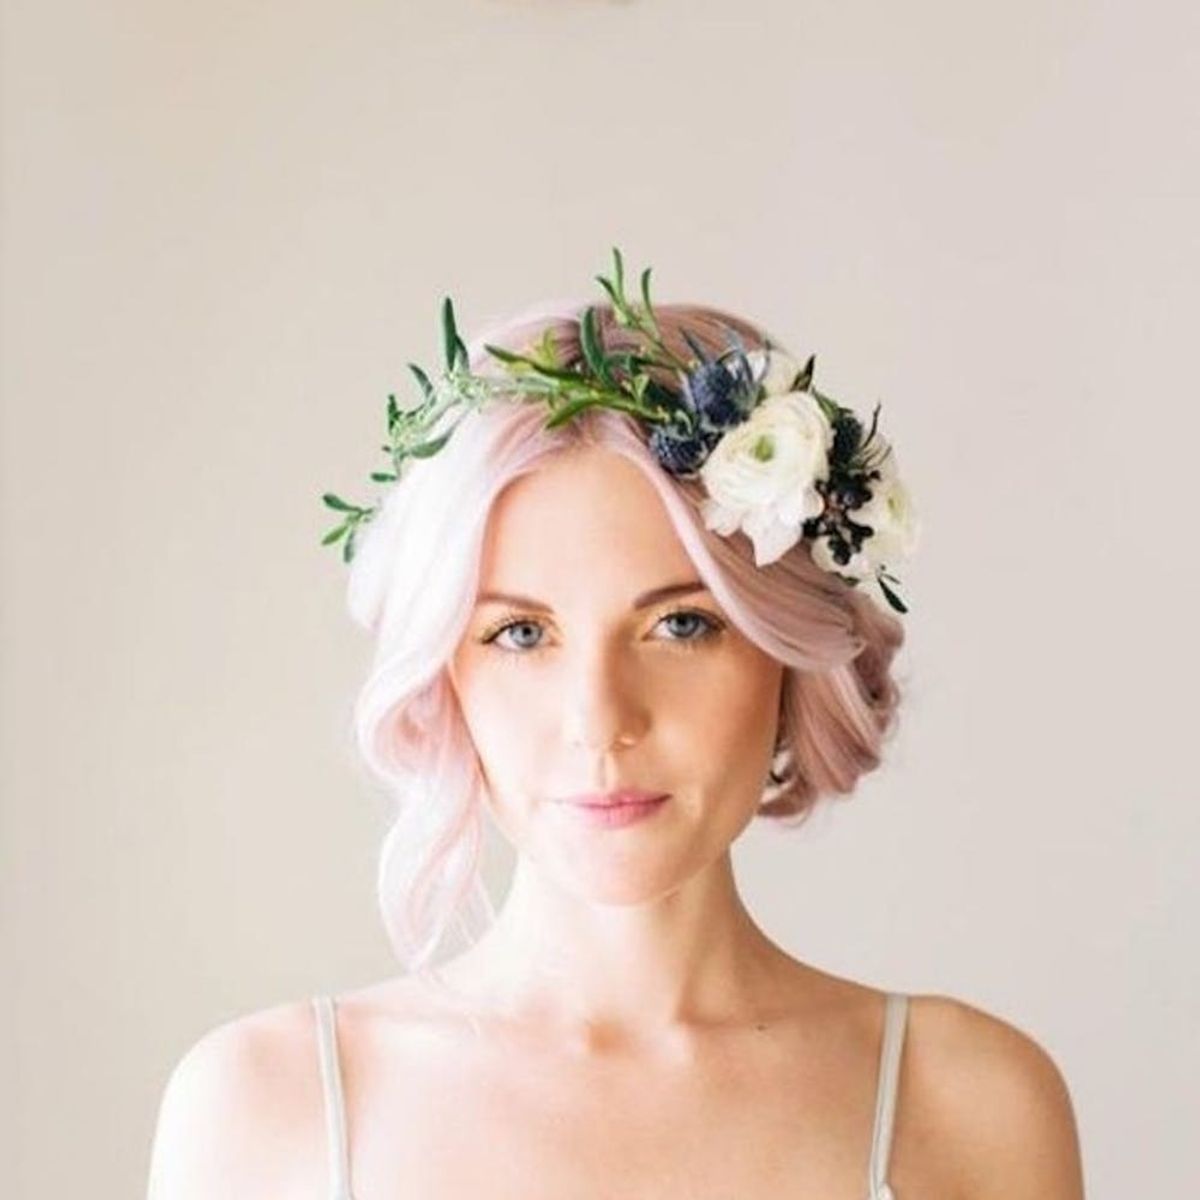 11 Beautiful Winter Flower Crowns for Your Wedding